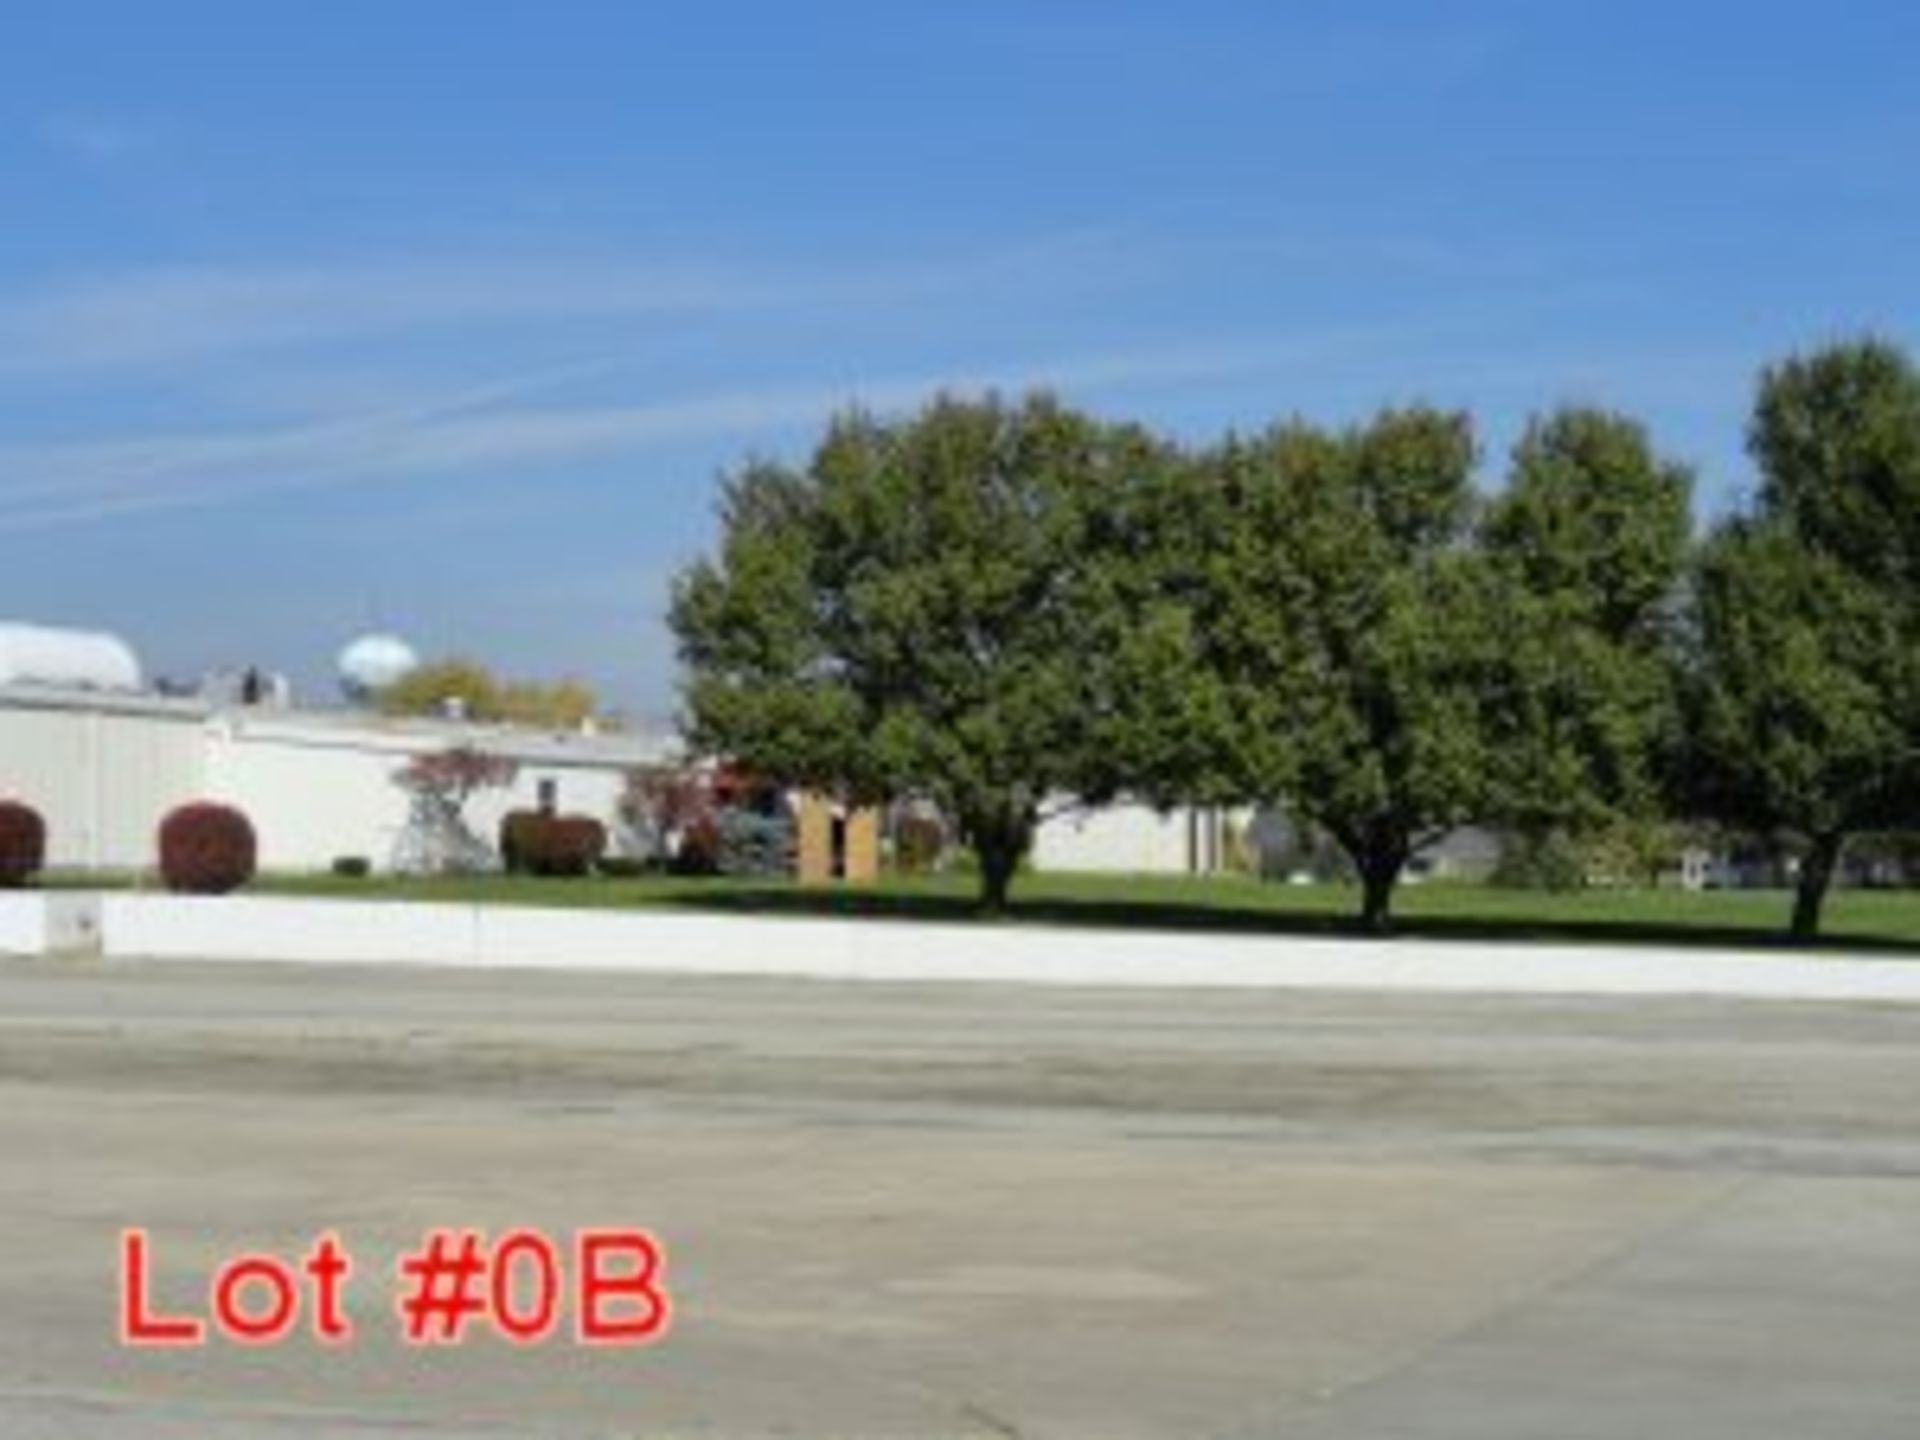 REAL PROPERTY ONLY: HIS LOT INCLUDES THE REAL PROPERTY LOCATED AT 900 NORTH CENTER ST. VERSAILLES OH - Image 4 of 6